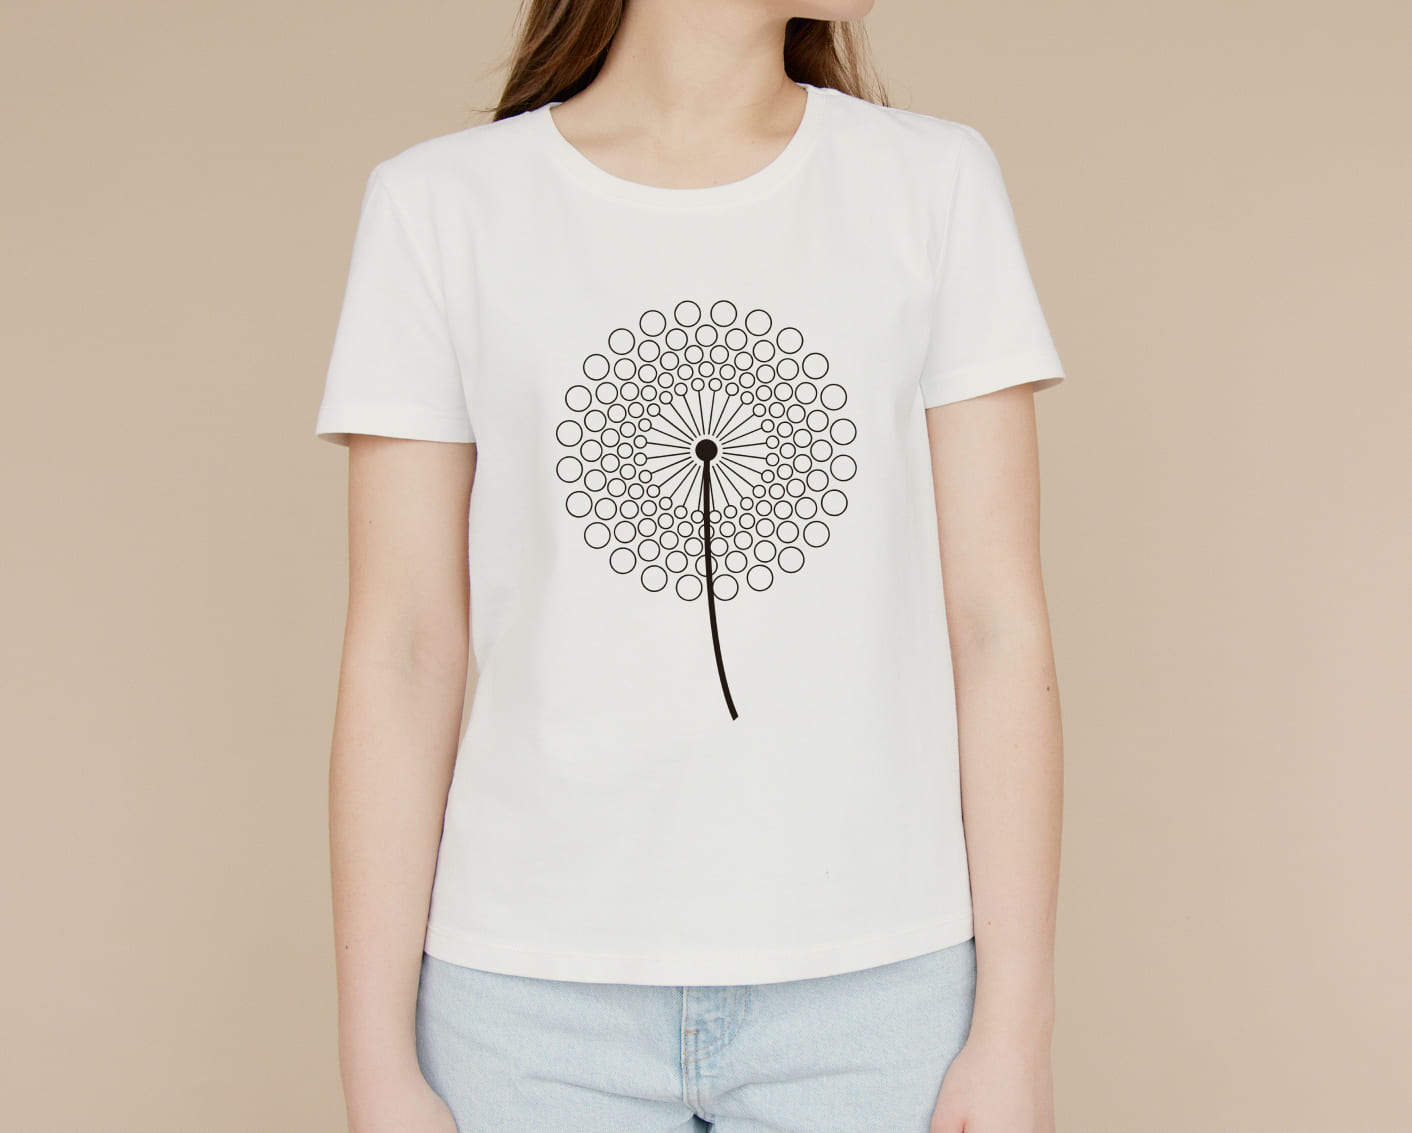 A white T-shirt with a black silhouette of a dandelion flower on a girl on a beige background.